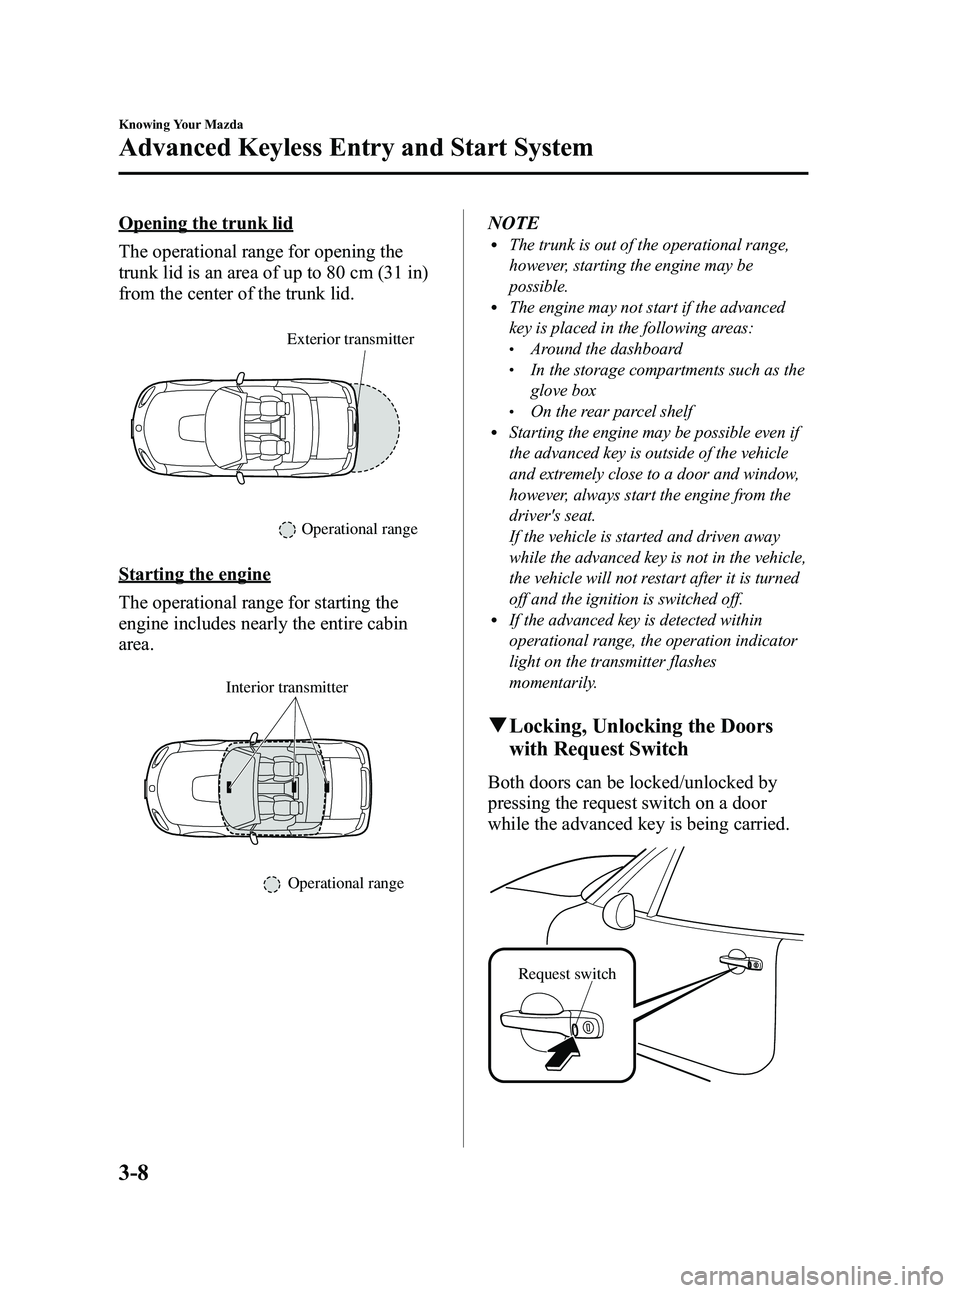 MAZDA MODEL MX-5 MIATA PRHT 2013  Owners Manual Black plate (62,1)
Opening the trunk lid
The operational range for opening the
trunk lid is an area of up to 80 cm (31 in)
from the center of the trunk lid.
Exterior transmitter
Operational range
Star